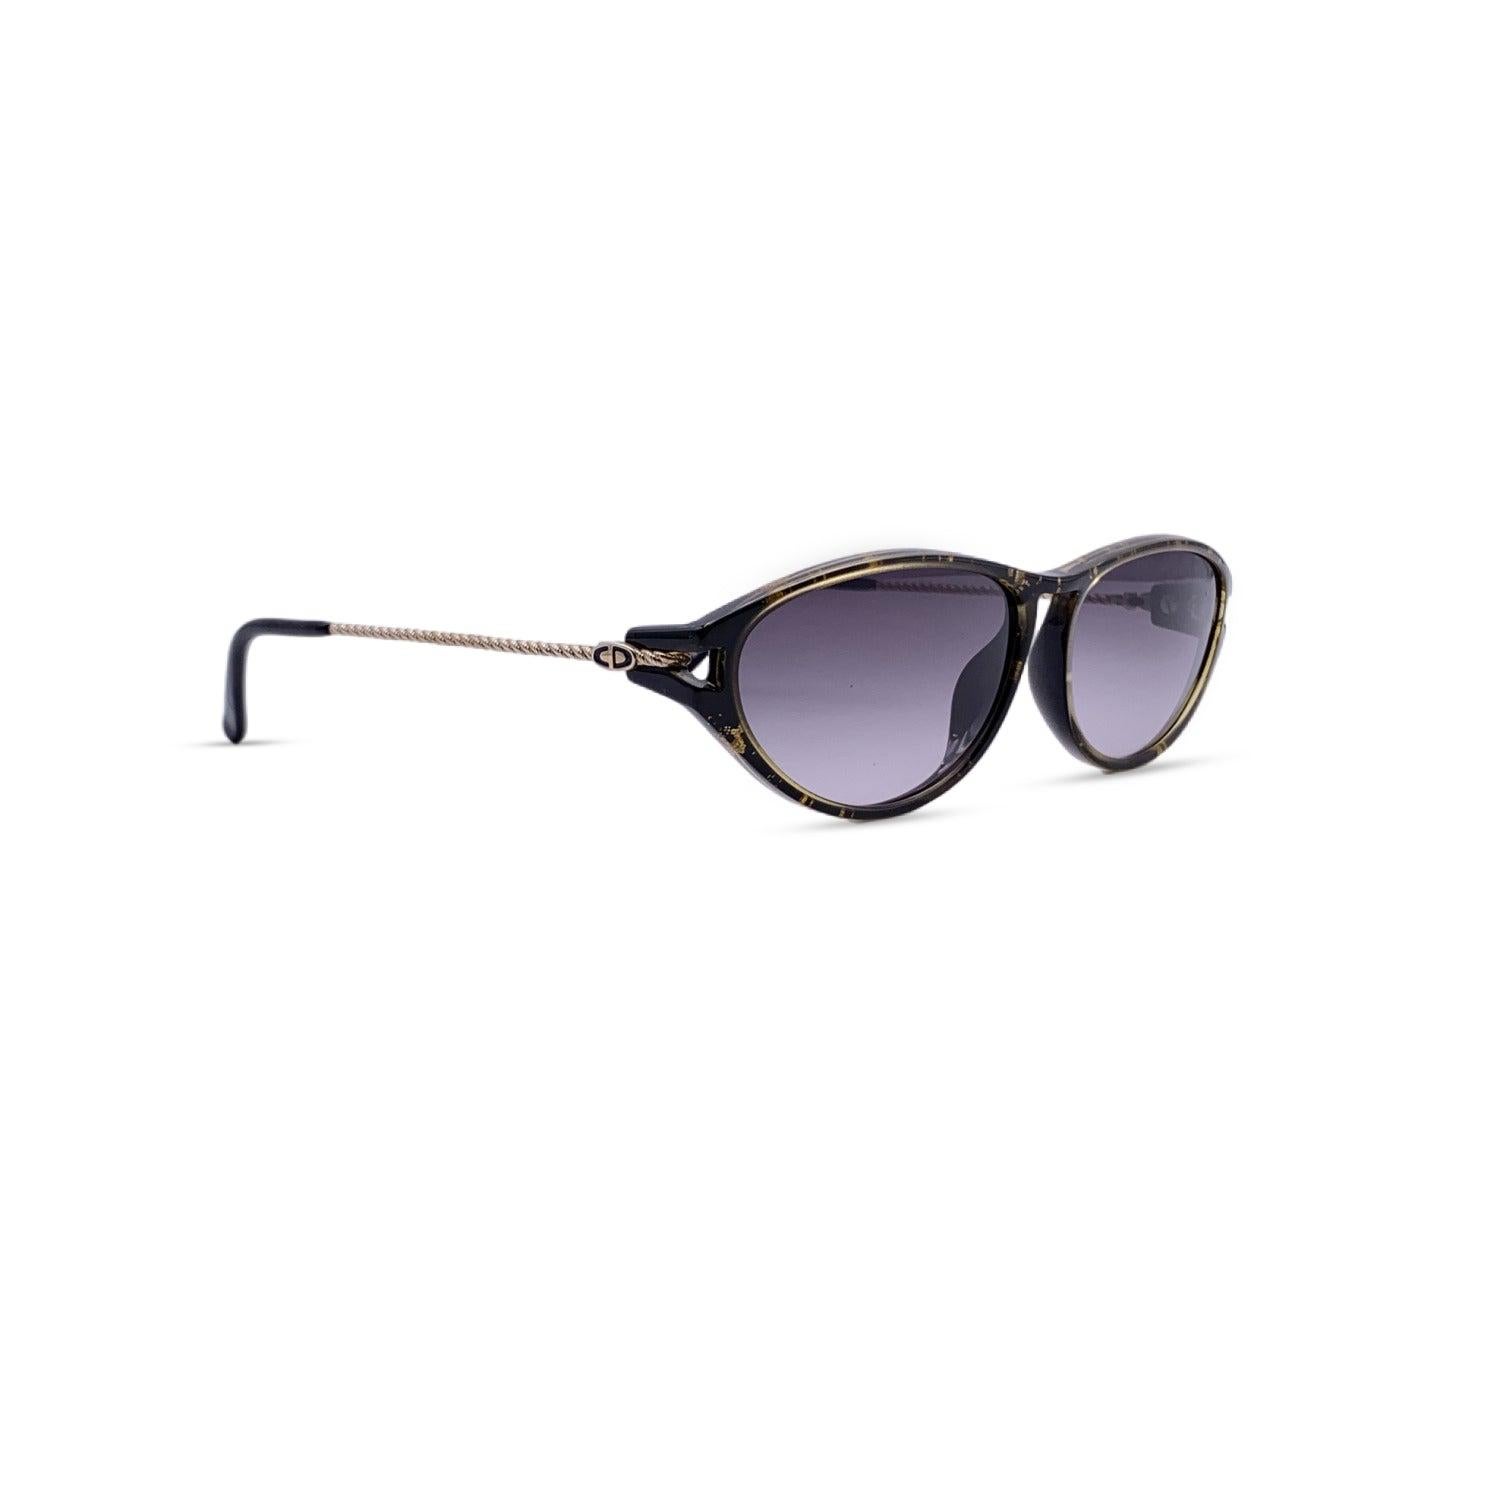 Christian Dior Vintage Cat-Eye Sunglasses 2577 90 Optyl 60/14 125mm In Excellent Condition For Sale In Rome, Rome